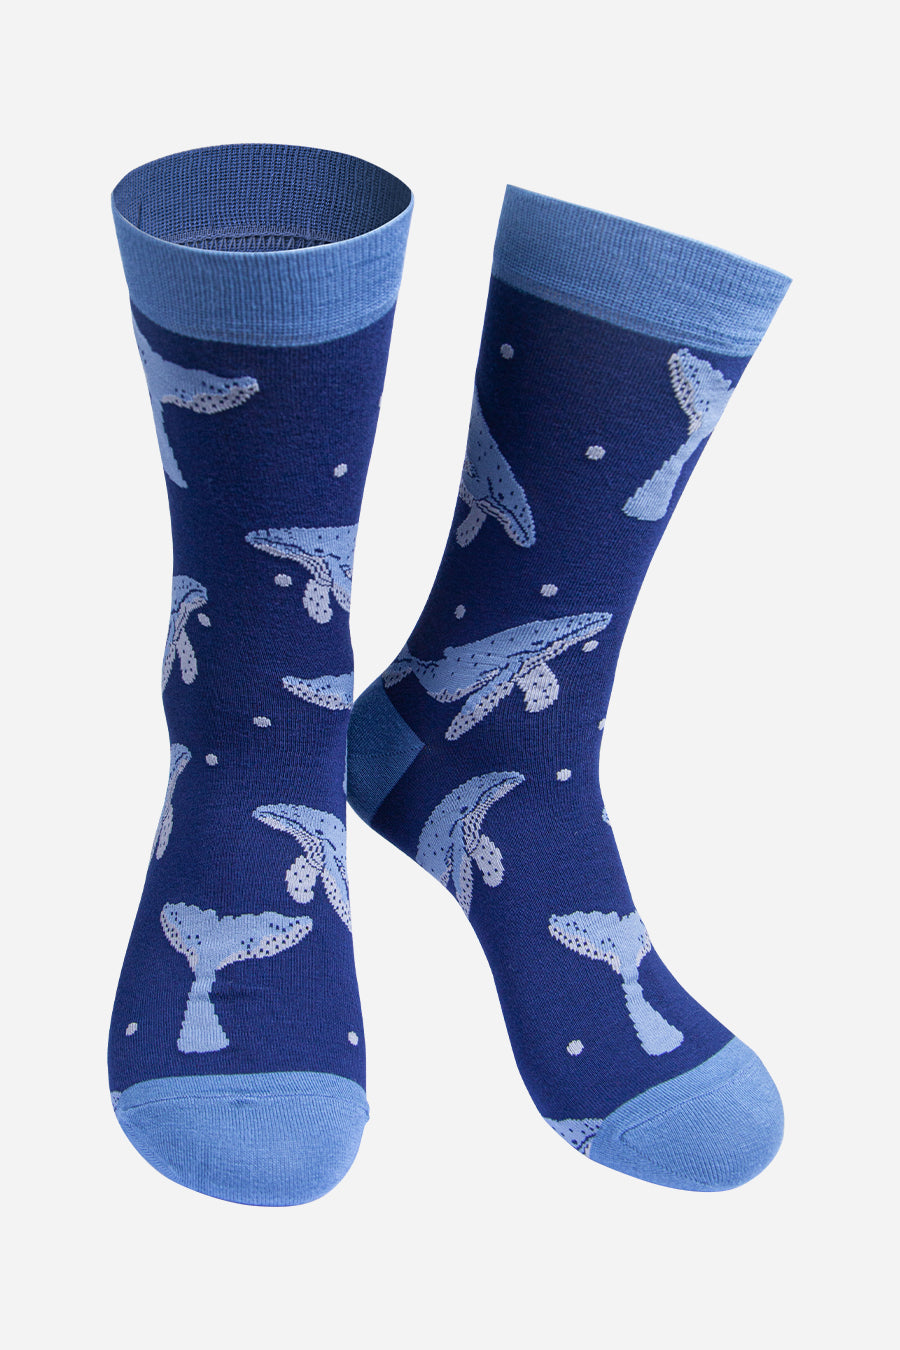 blue bamboo socks with a pattern of blue whales all over